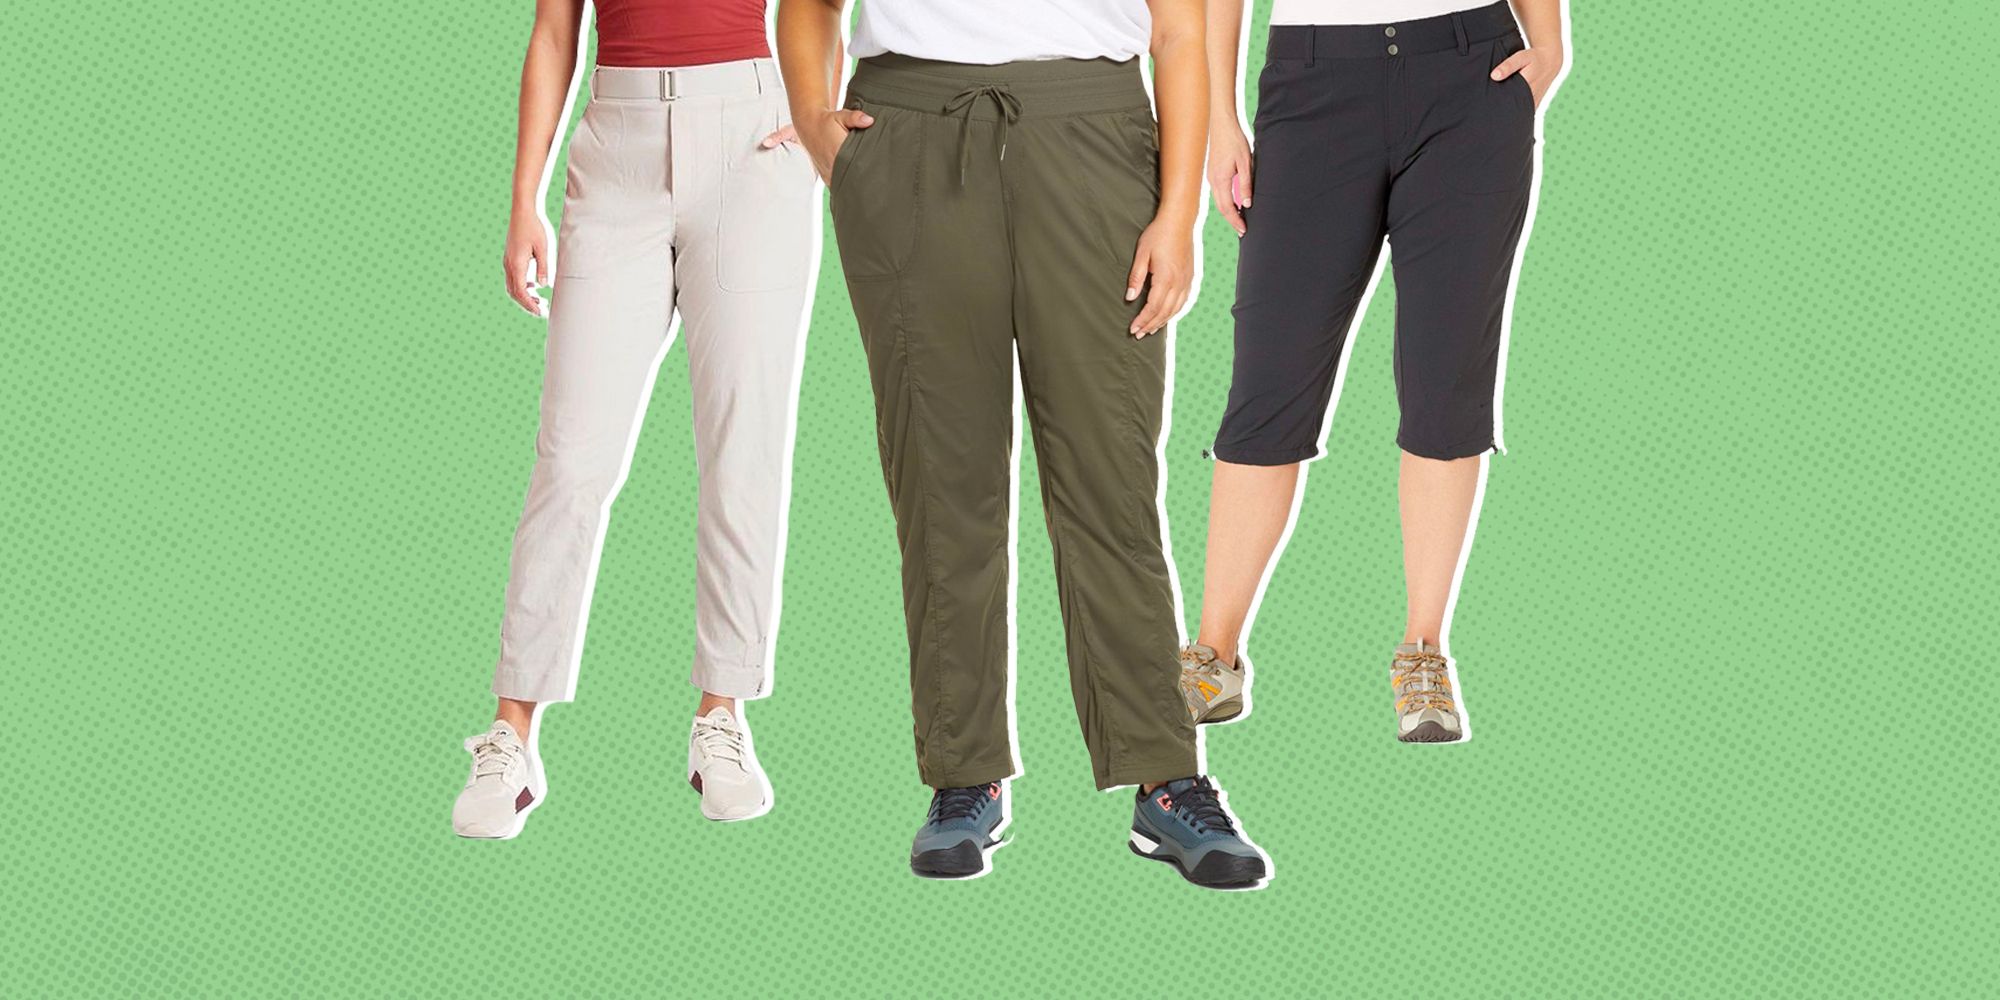 10 Best Plus-Size Hiking Pants for Women 2022